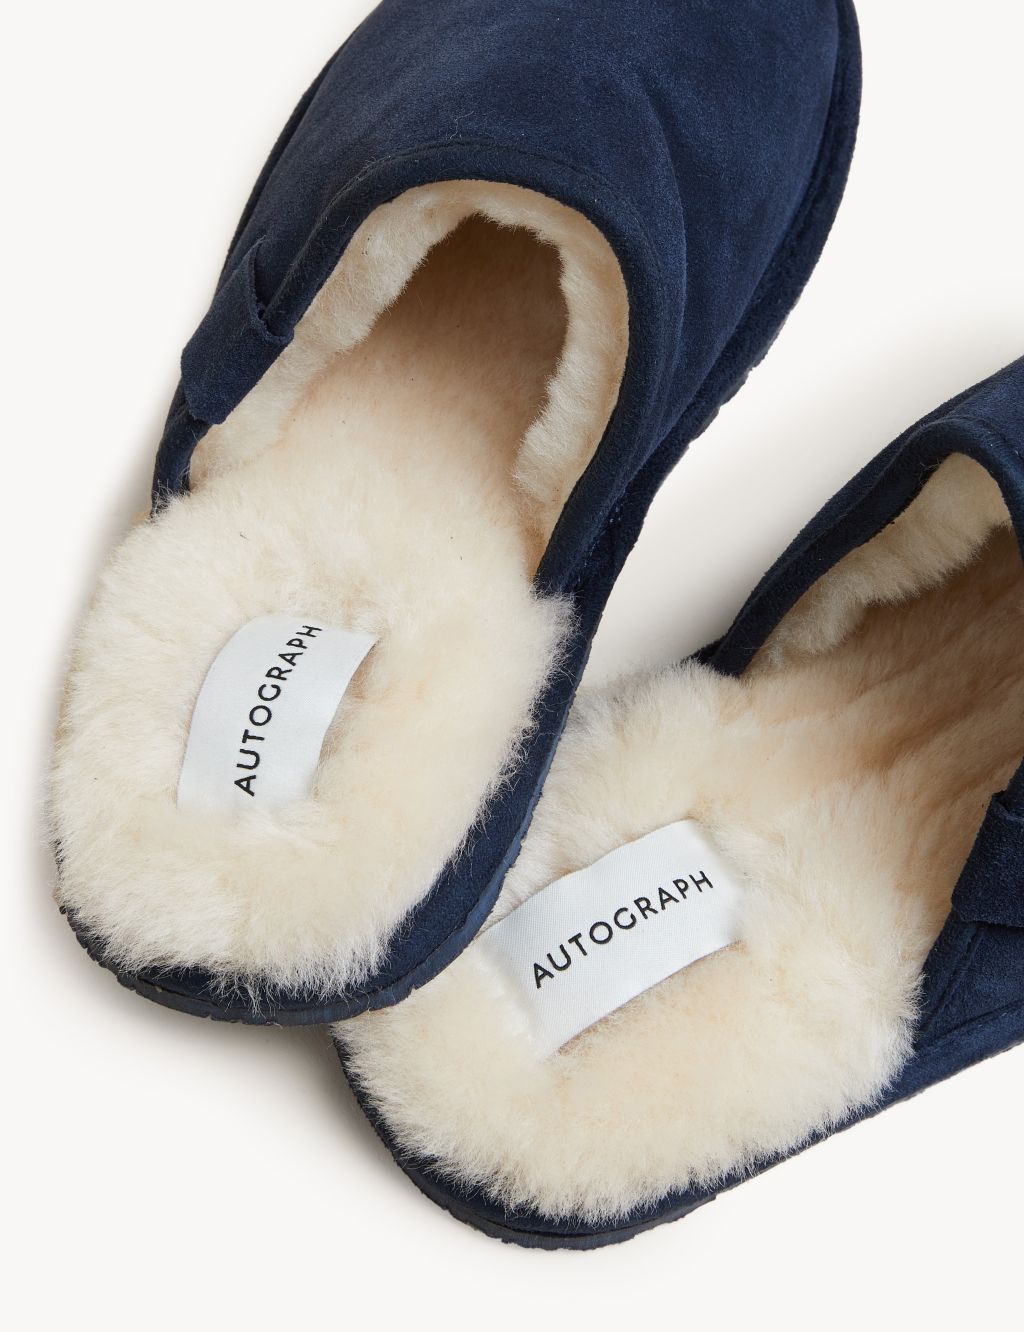 Suede Mule Slippers with Freshfeet™ image 2